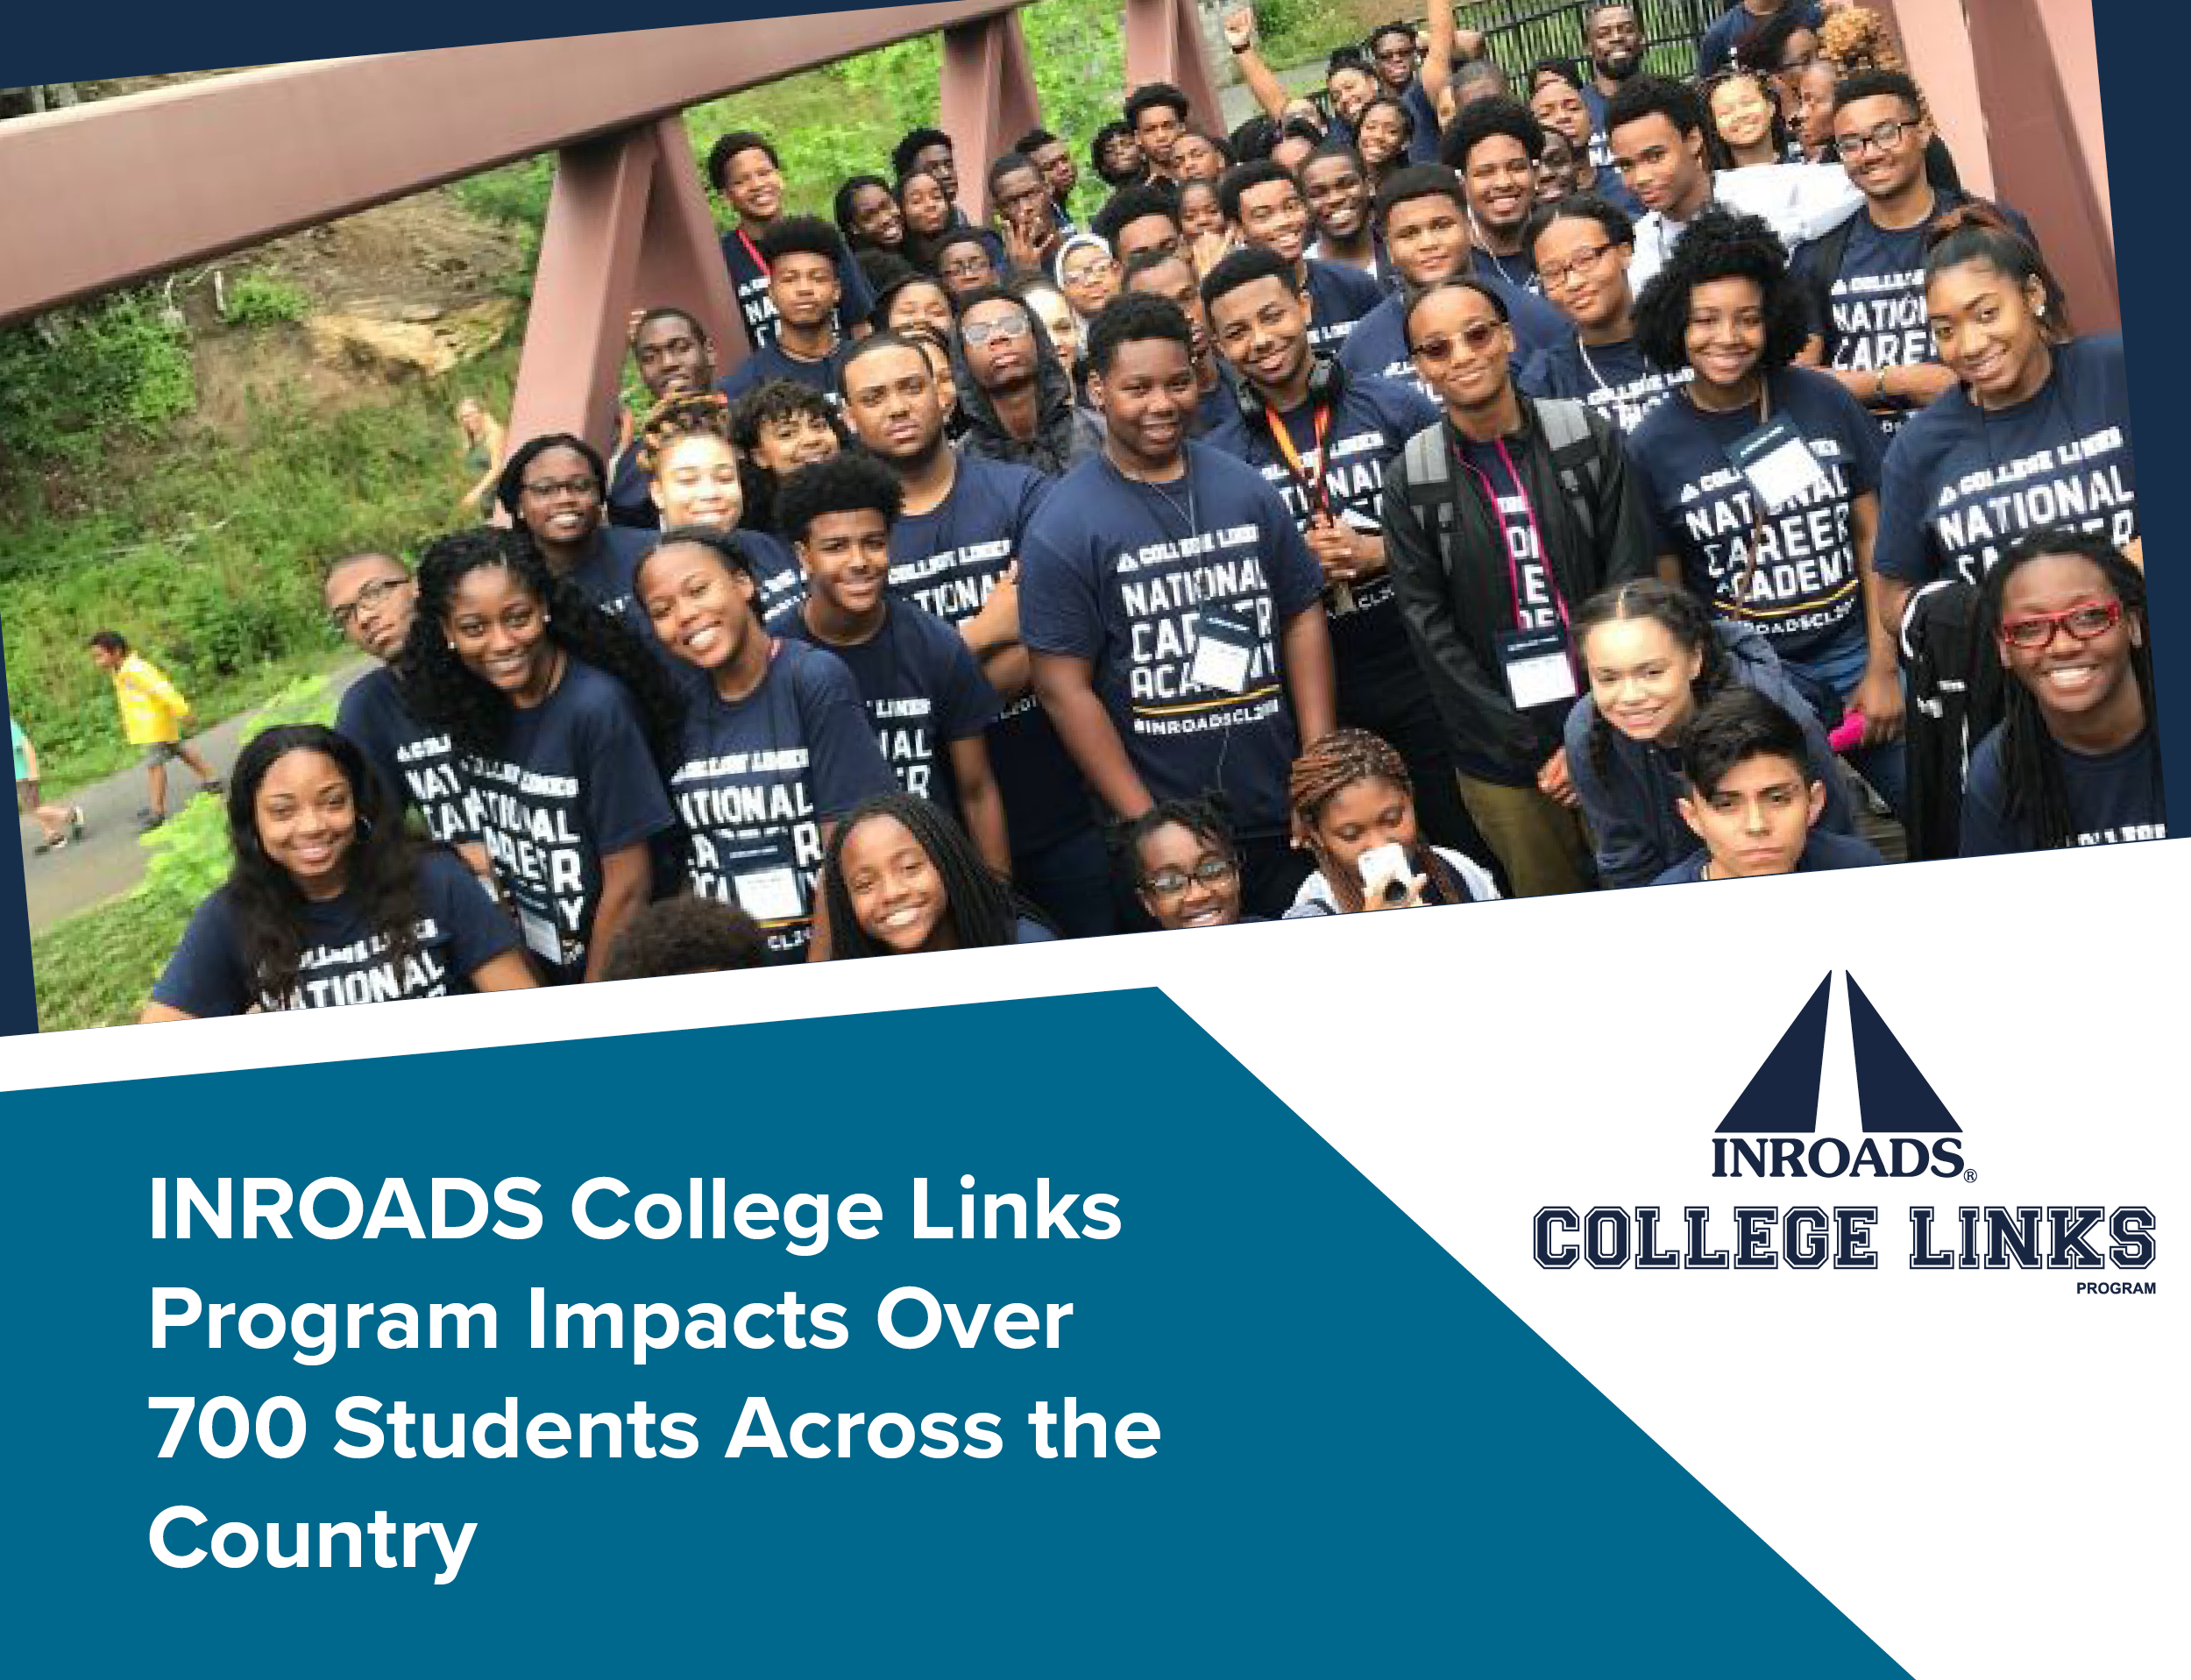 Featured image for “INROADS College Links Program Impacts Over 700 Students with Digital Transformation Skills Designed for College and Workplace Readiness”